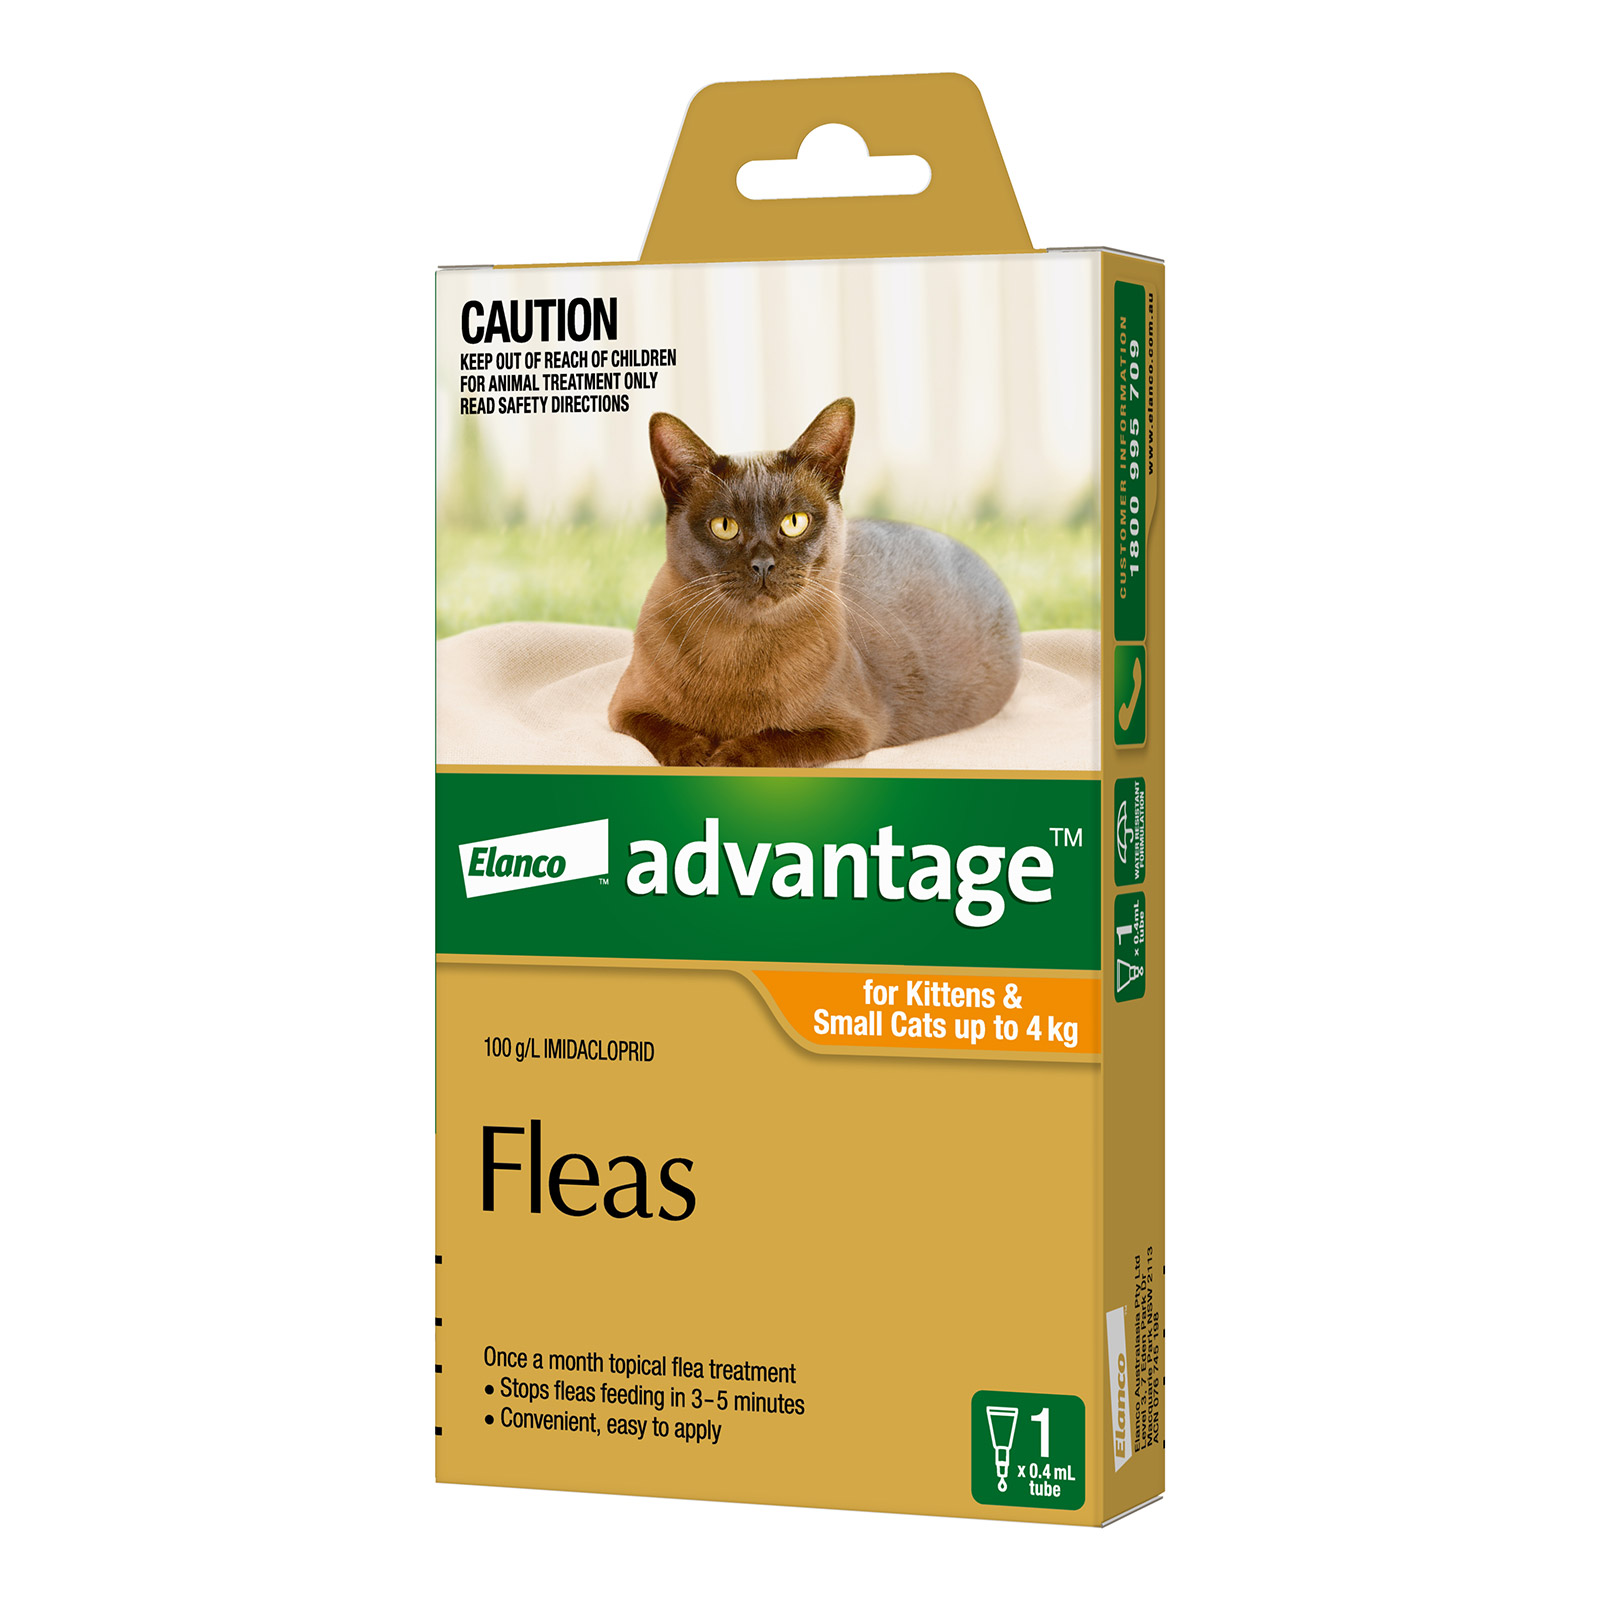 buy-advantage-for-kittens-small-cats-up-to-4kg-orange-free-shipping